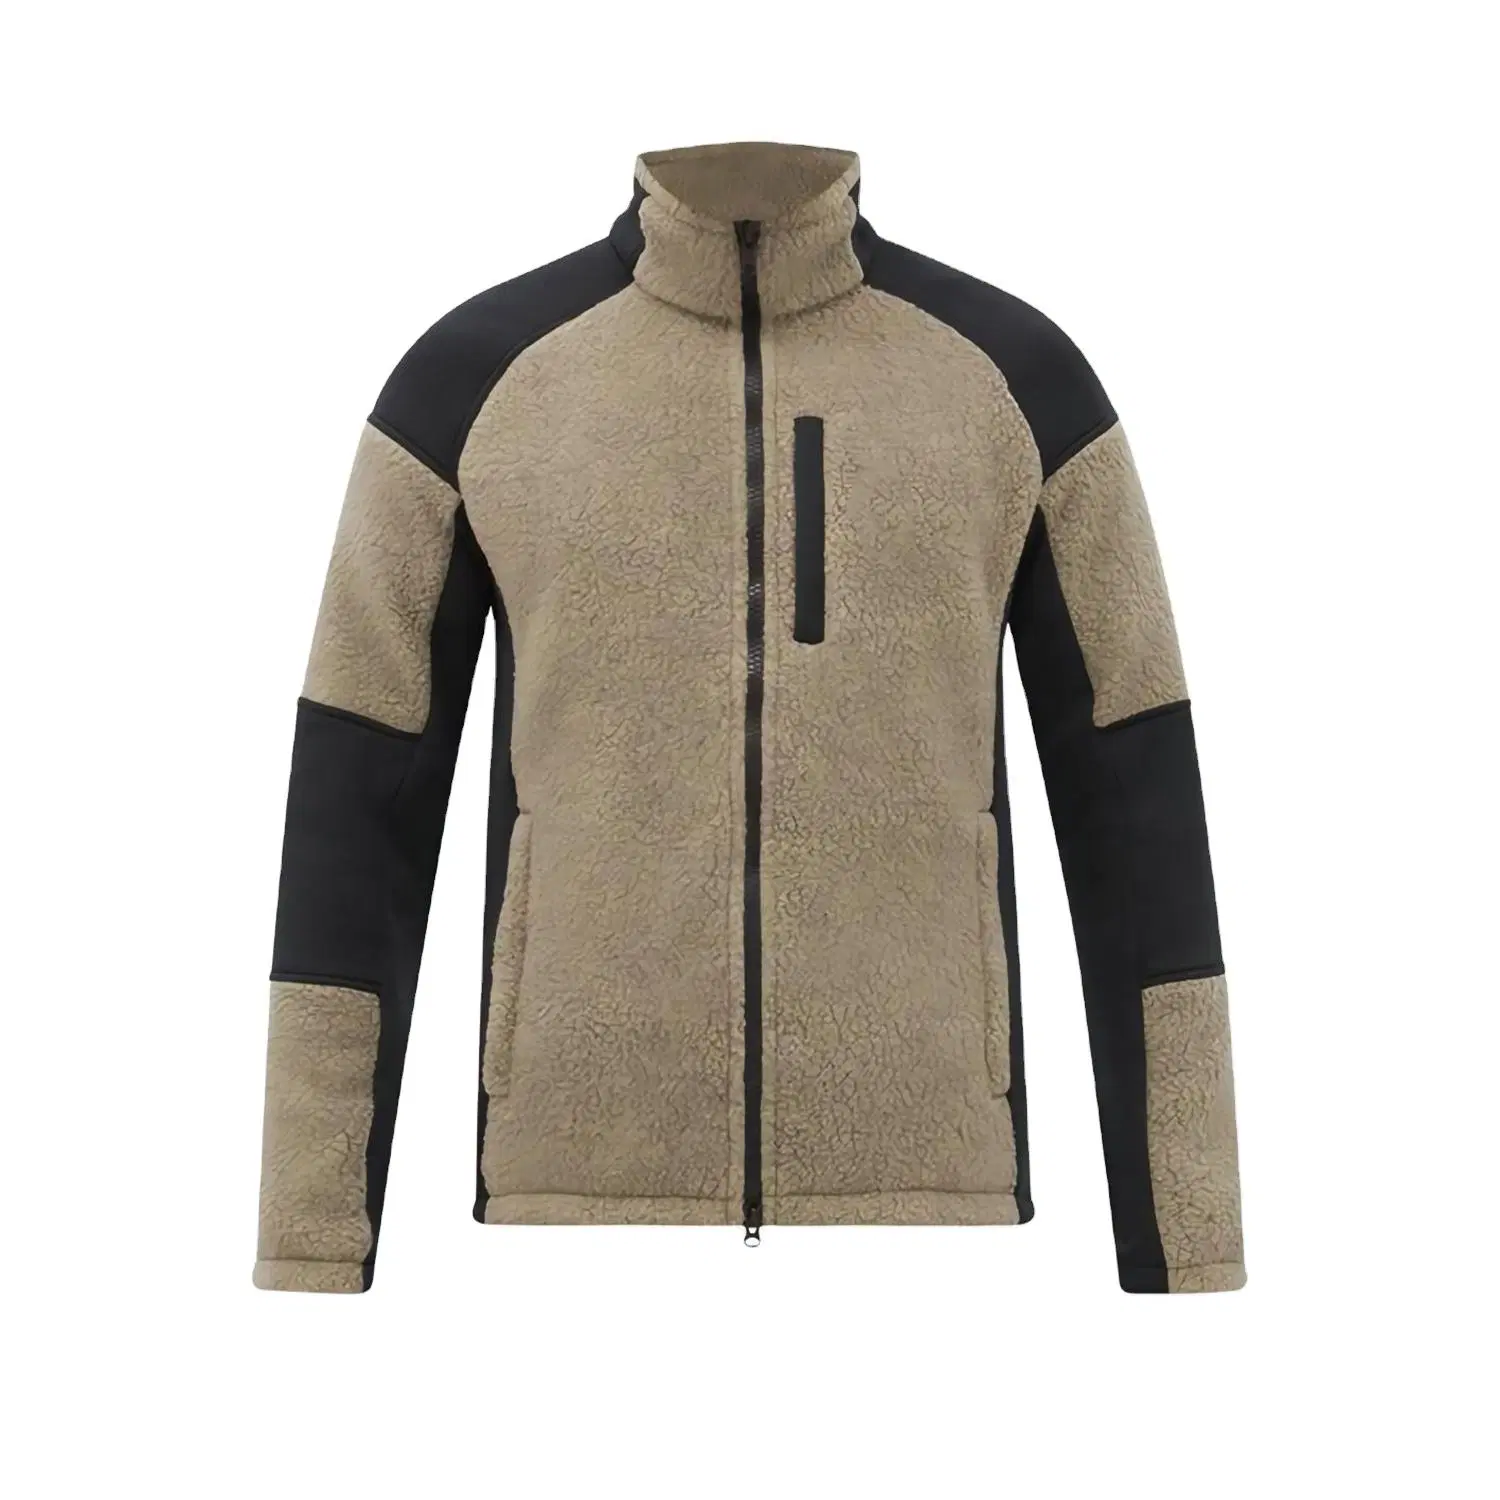 Men's Water and Wind Resistant Softshell Jacket with Grey and Black Color